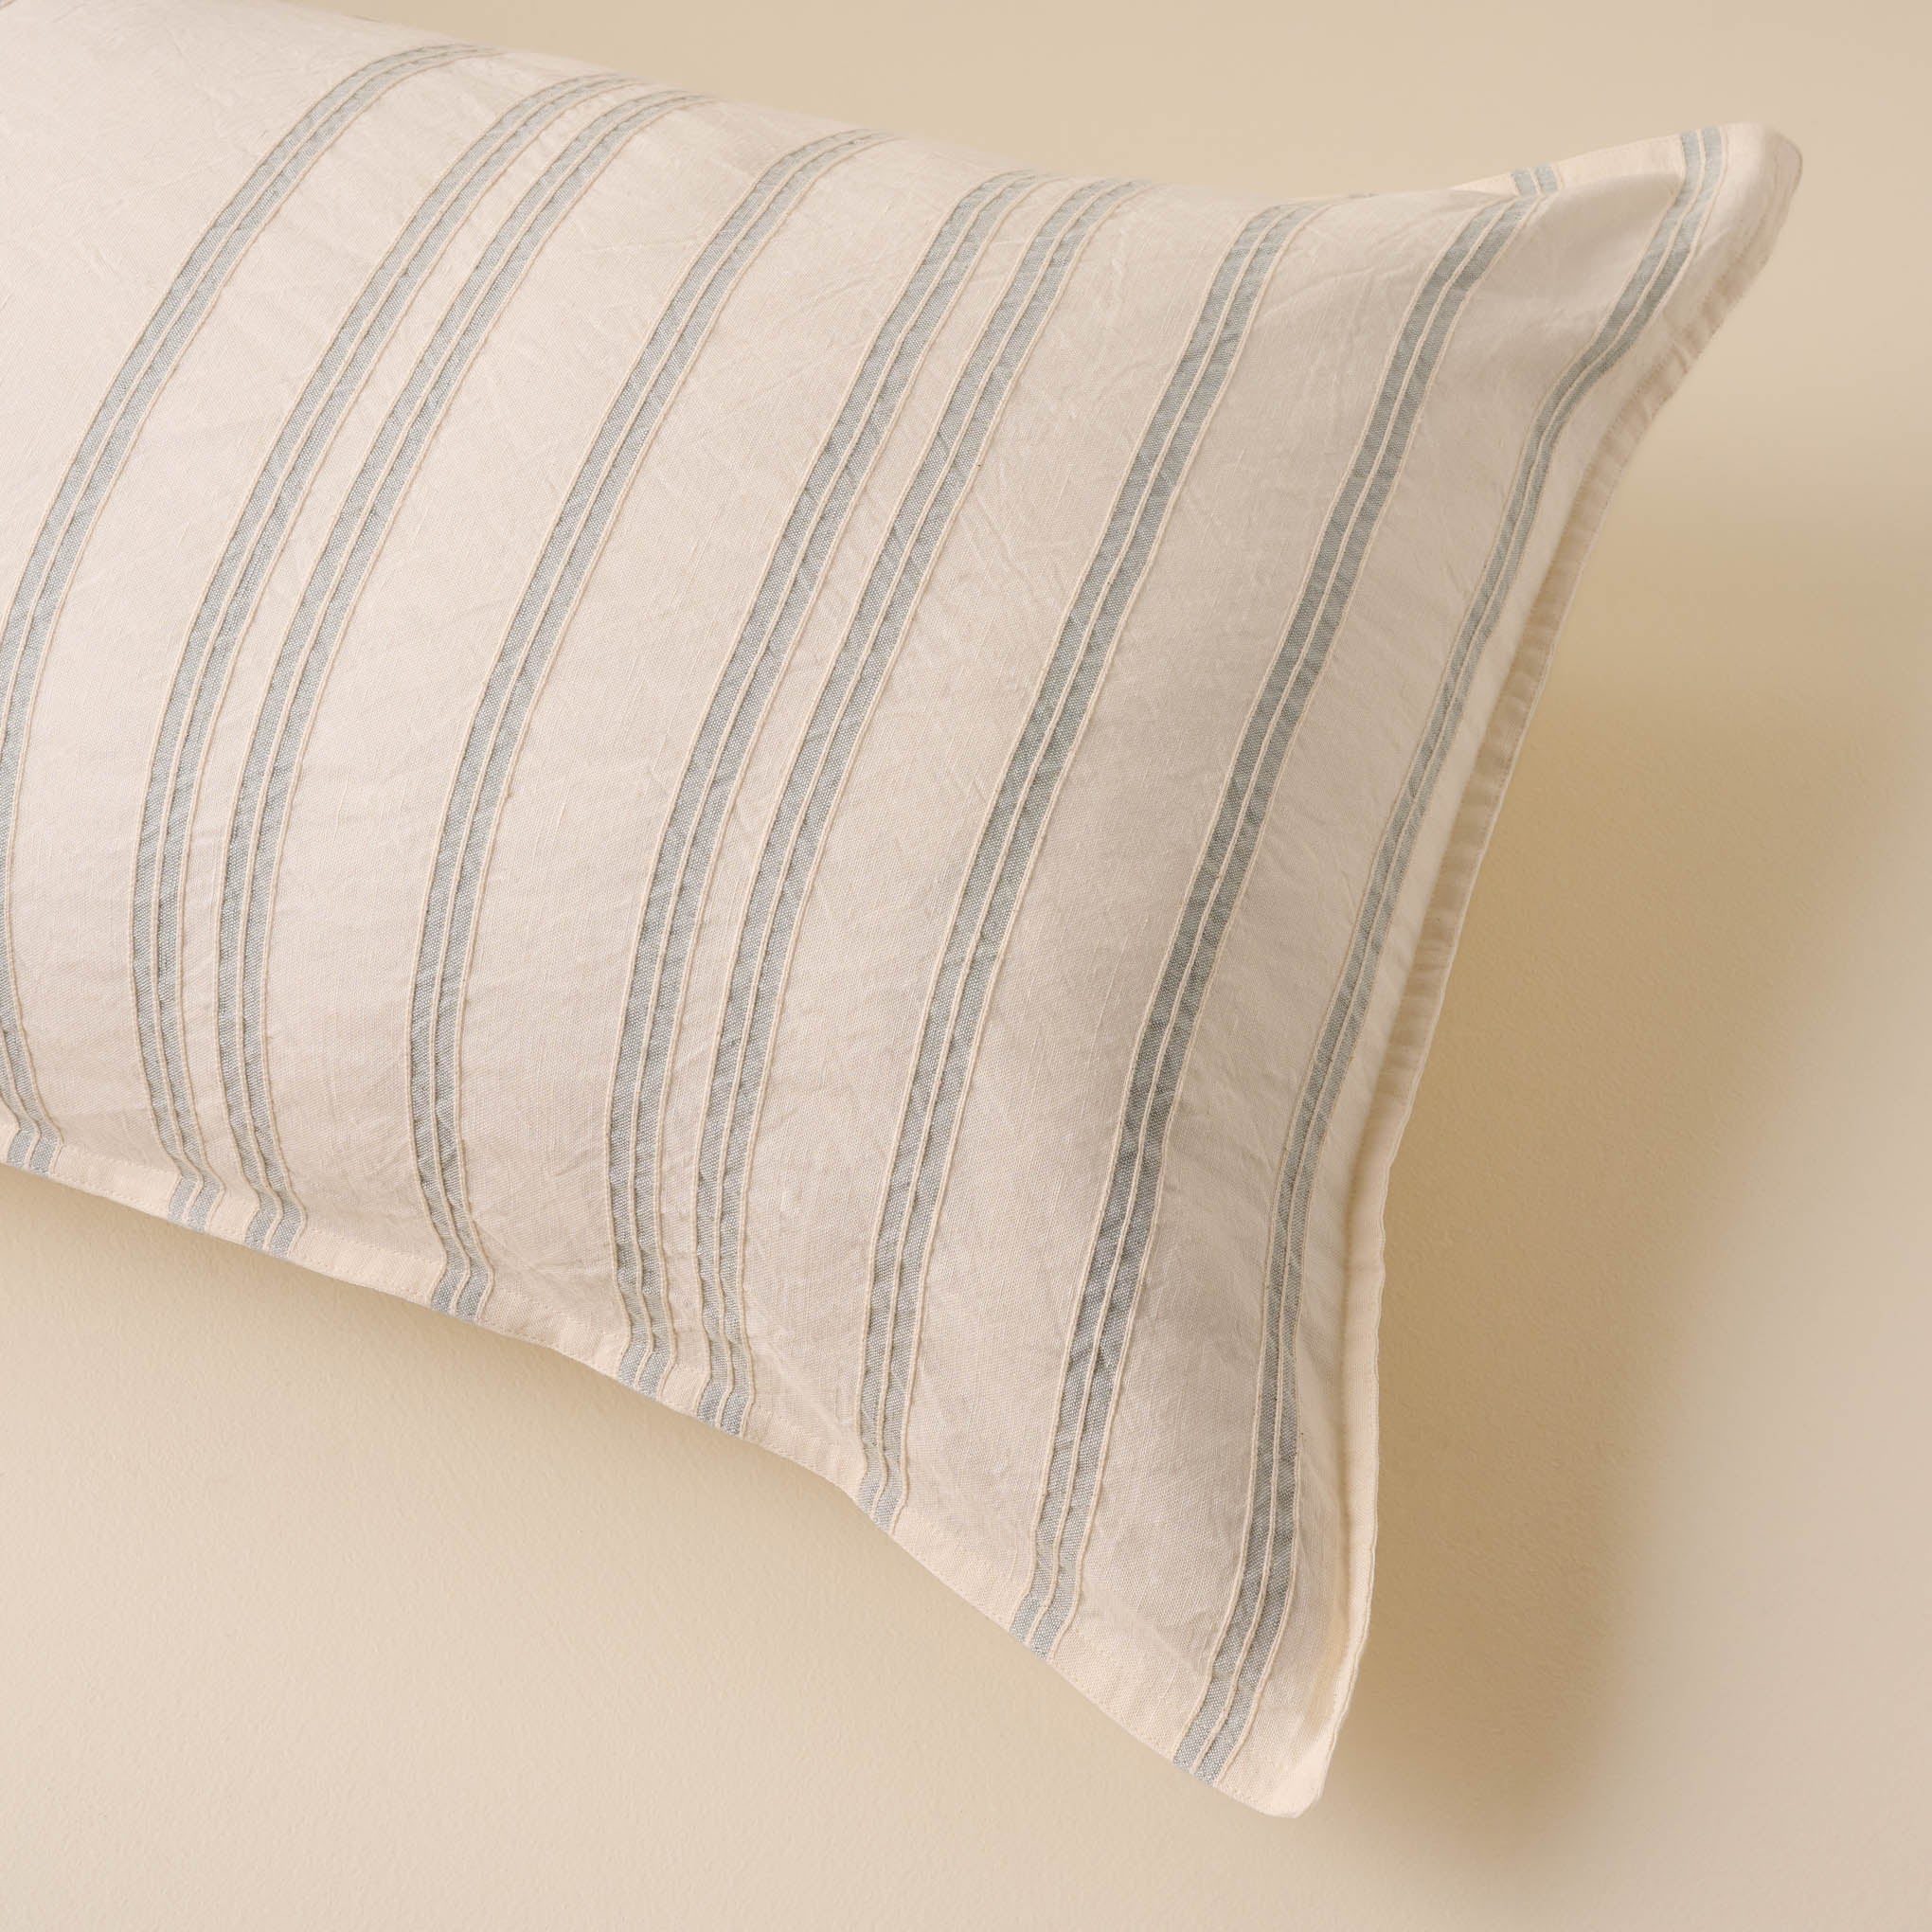 Embroidered Chambray Stripe Linen Cotton Sham Items range from $49.00 to $59.00